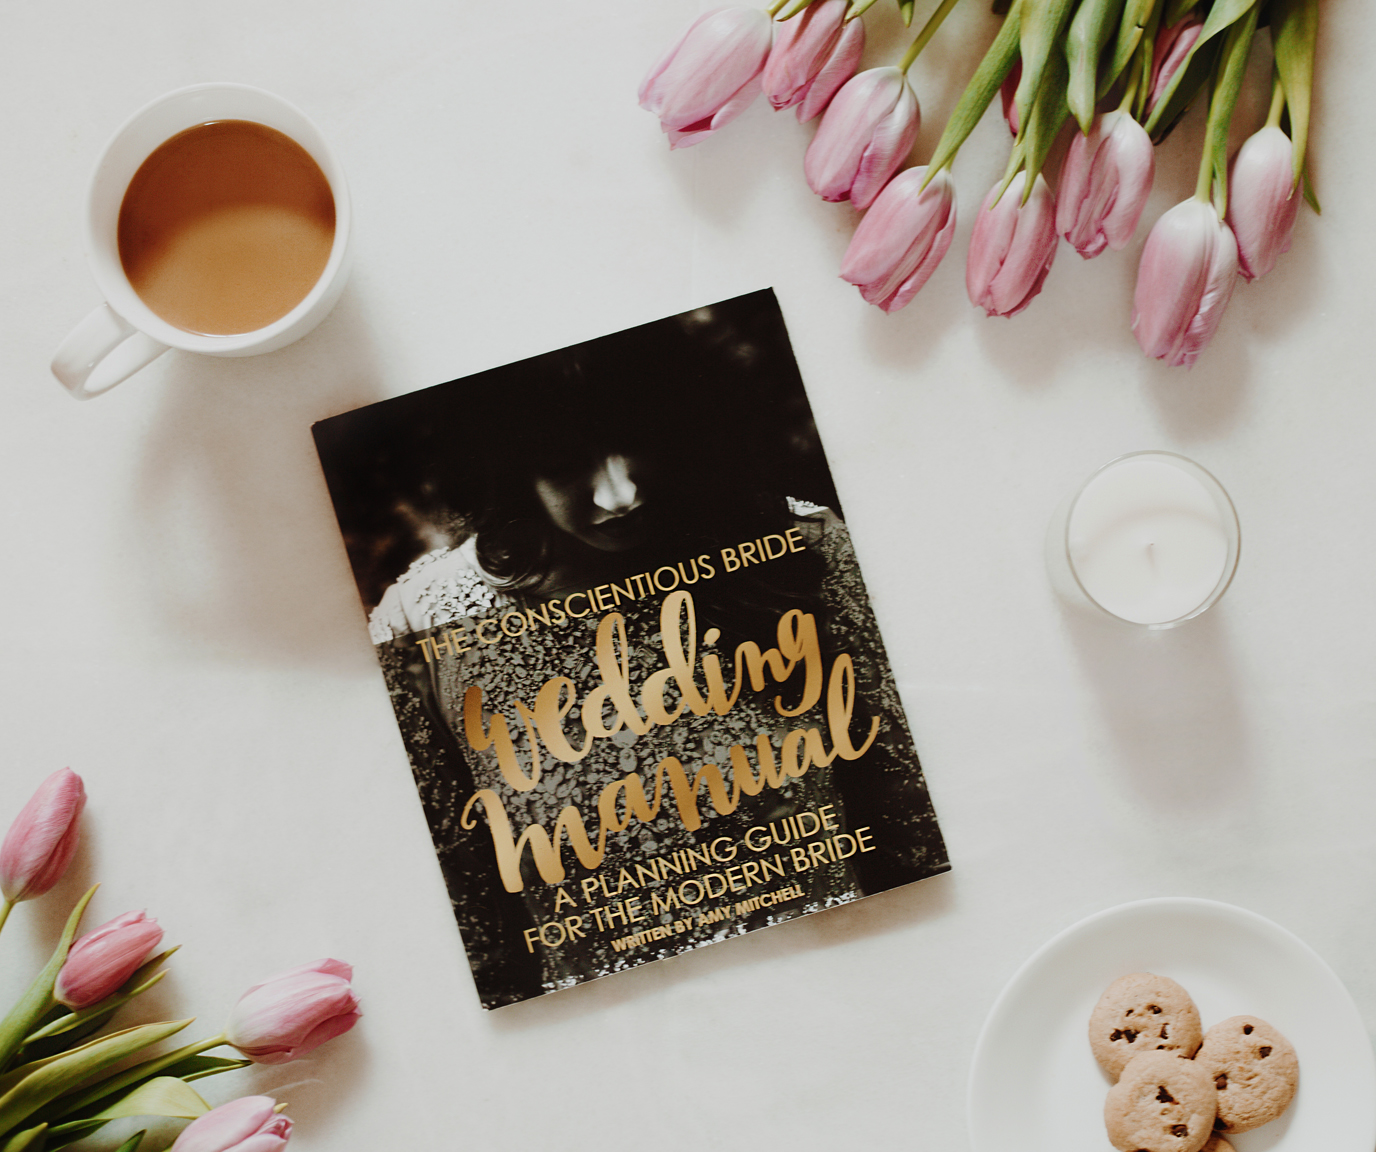 Win a Signed Copy Of The Conscientious Bride Wedding Manual